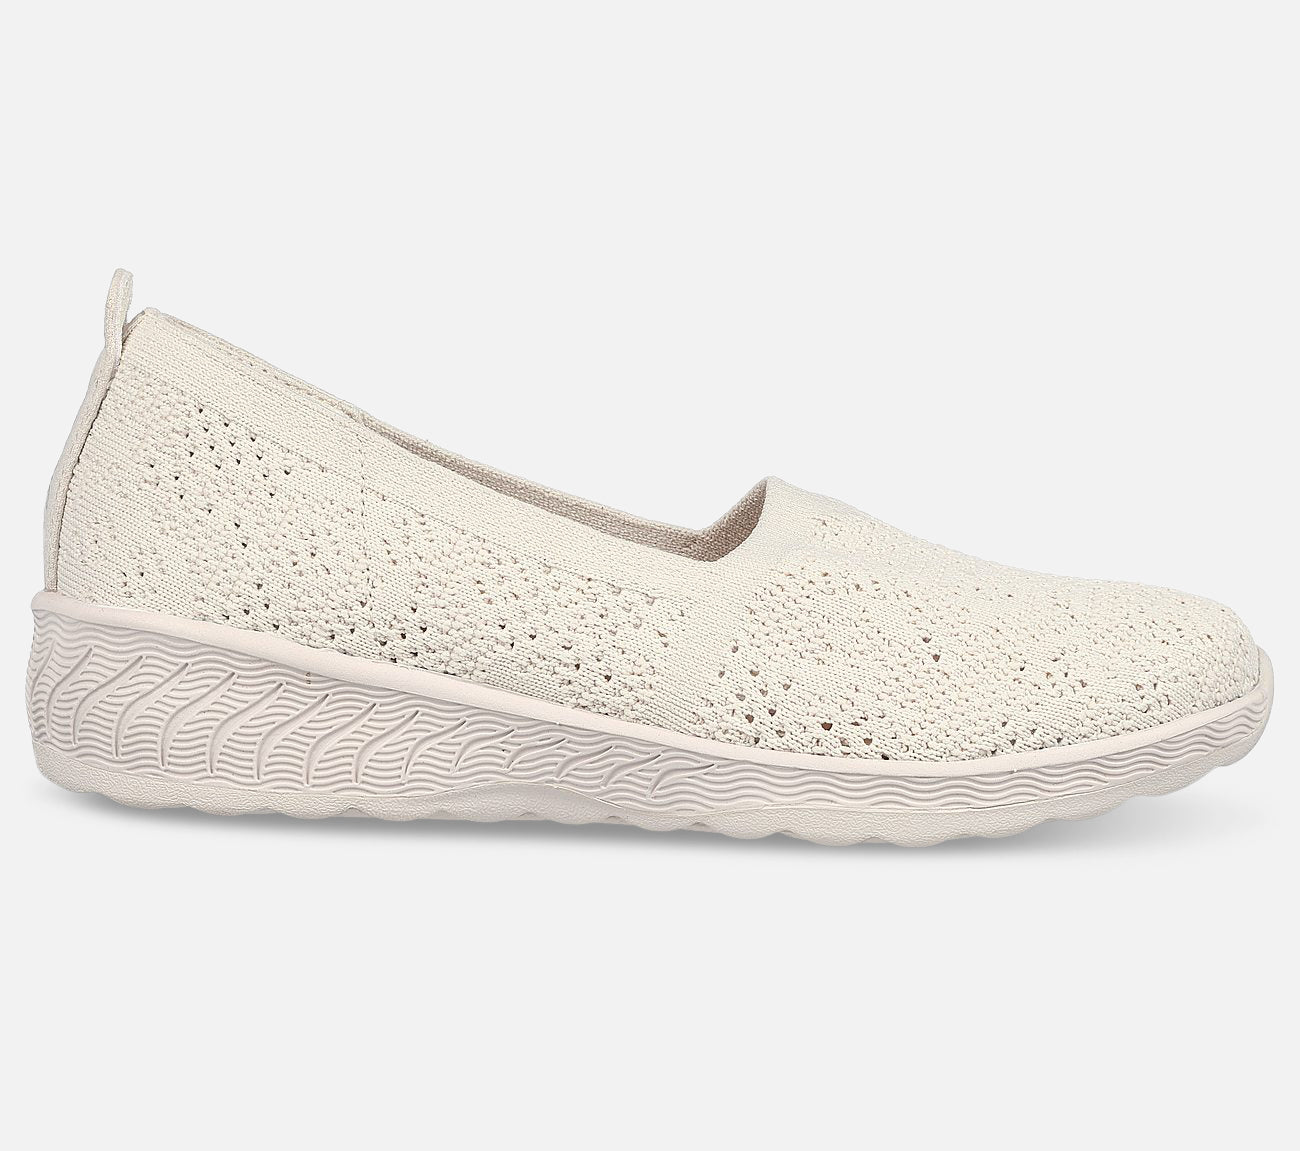 Up-Lifted: Pretty Lady Ballerina Skechers